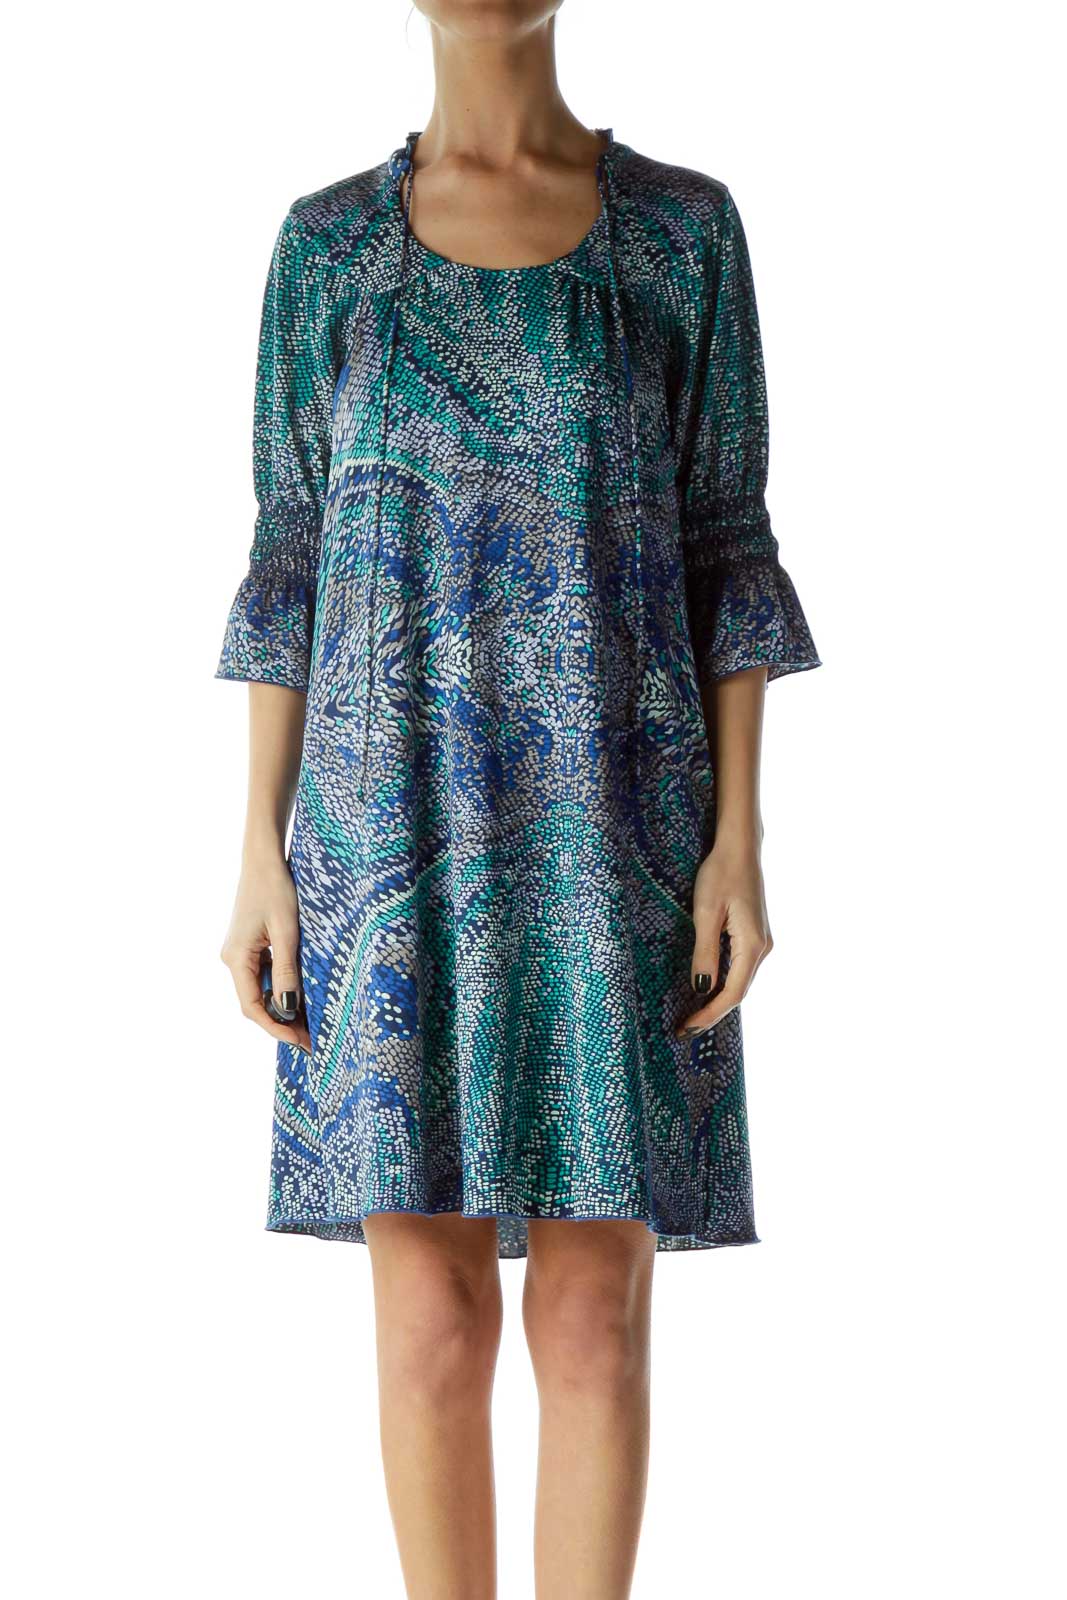 Blue Green Printed Shift Dress with Ruffle Detail Front